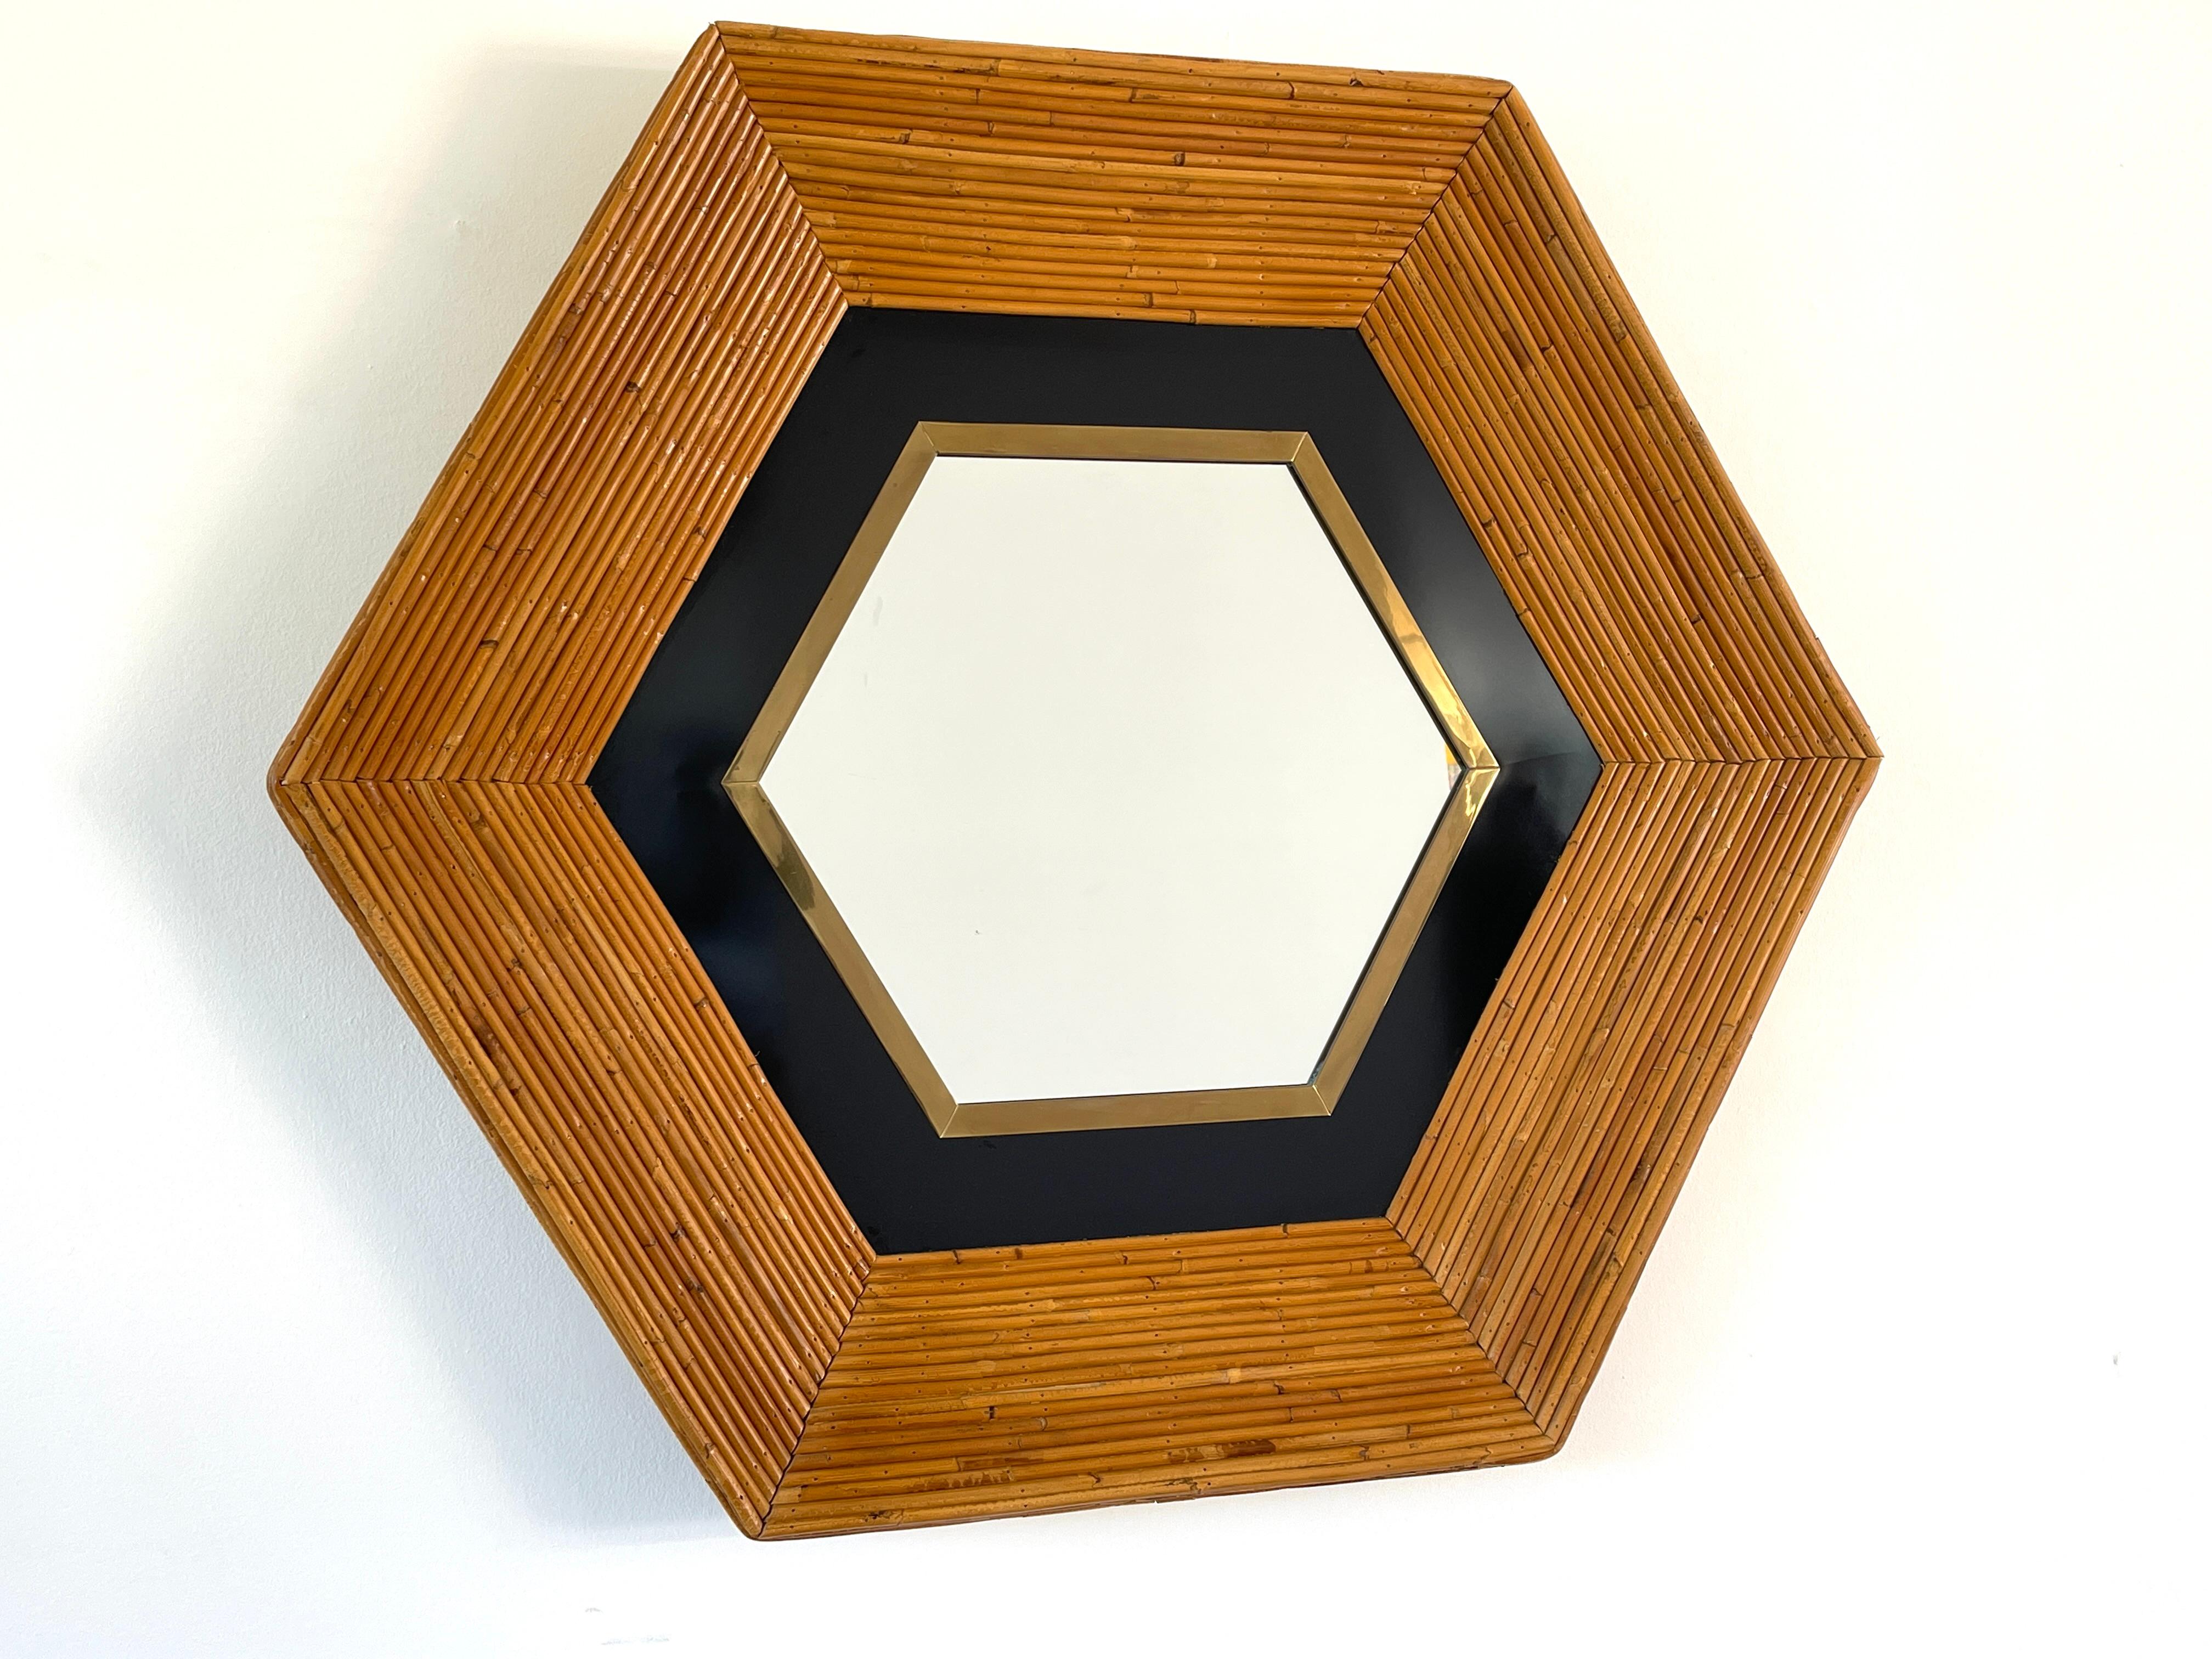 Impressive Italian designed mirror - circa 1970's 
Reed rattan with silvered mirror, brass and black metal detailing on the hexagon shaped frame. 
Wood backed.
Extremely well made.